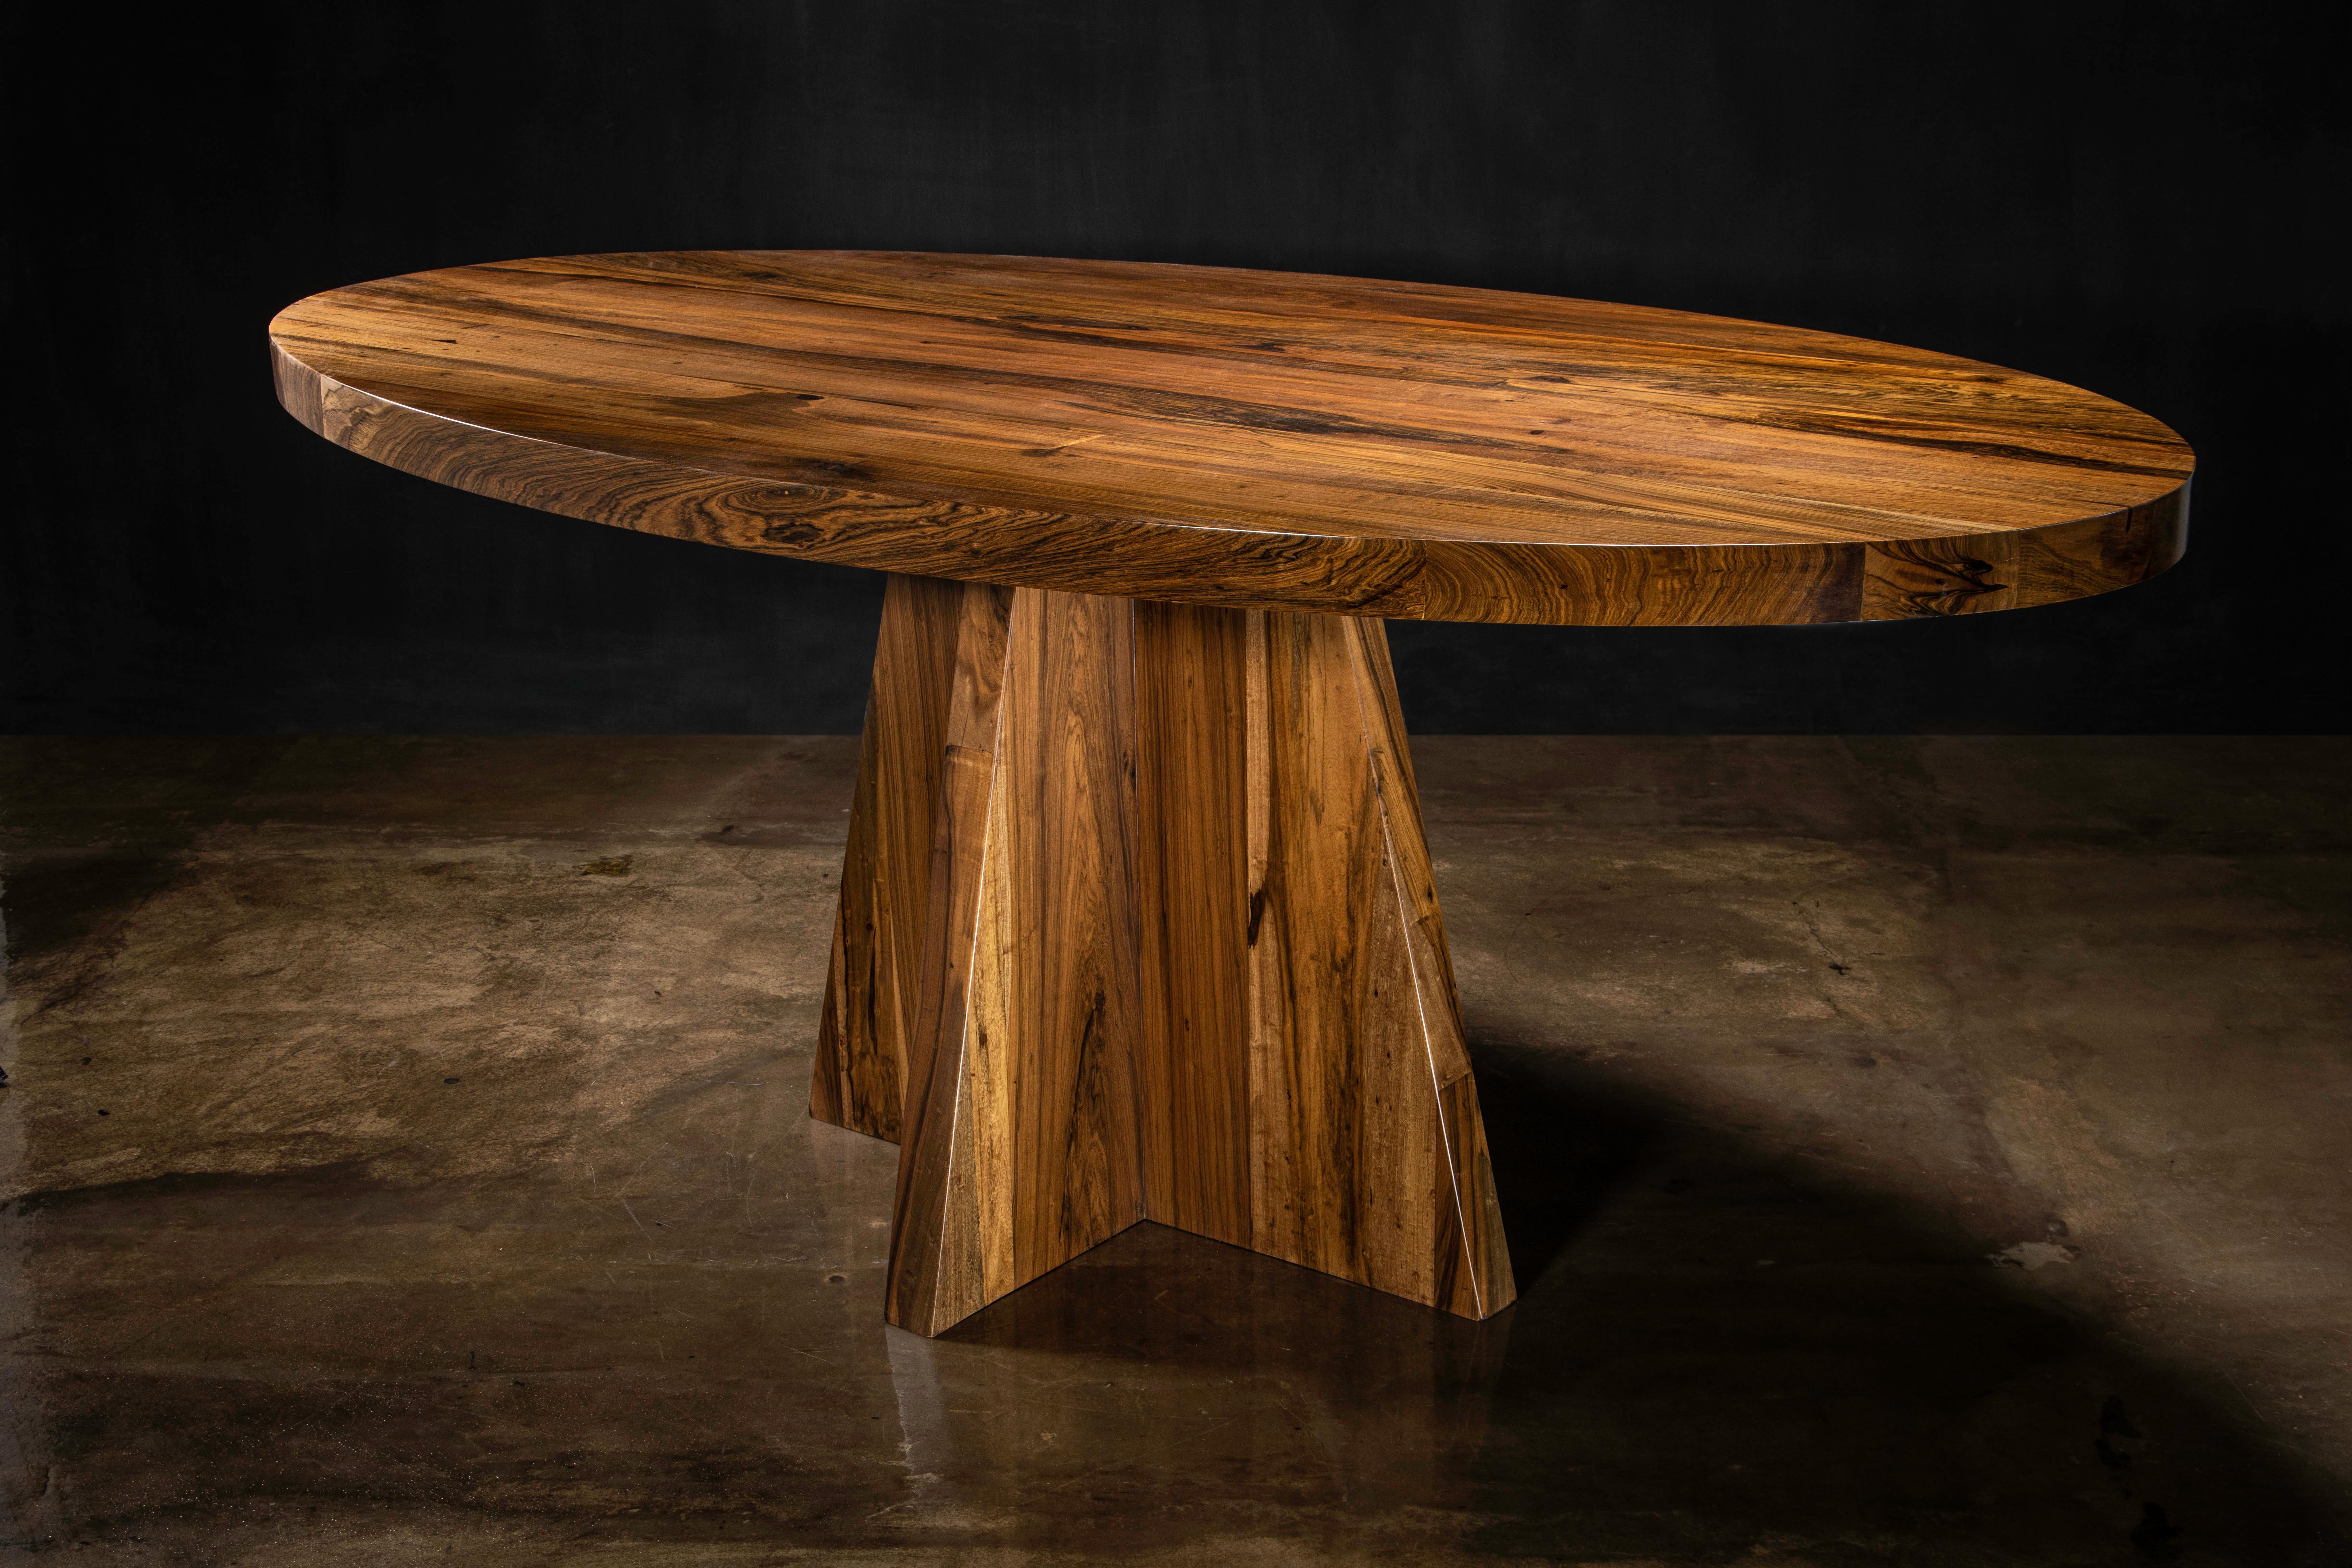 In Stock 

One-of-a-kind Luca Oval Extra Thick Solid Argentine Rosewood Pedestal Dining Table by Costantini

Measurments are 72